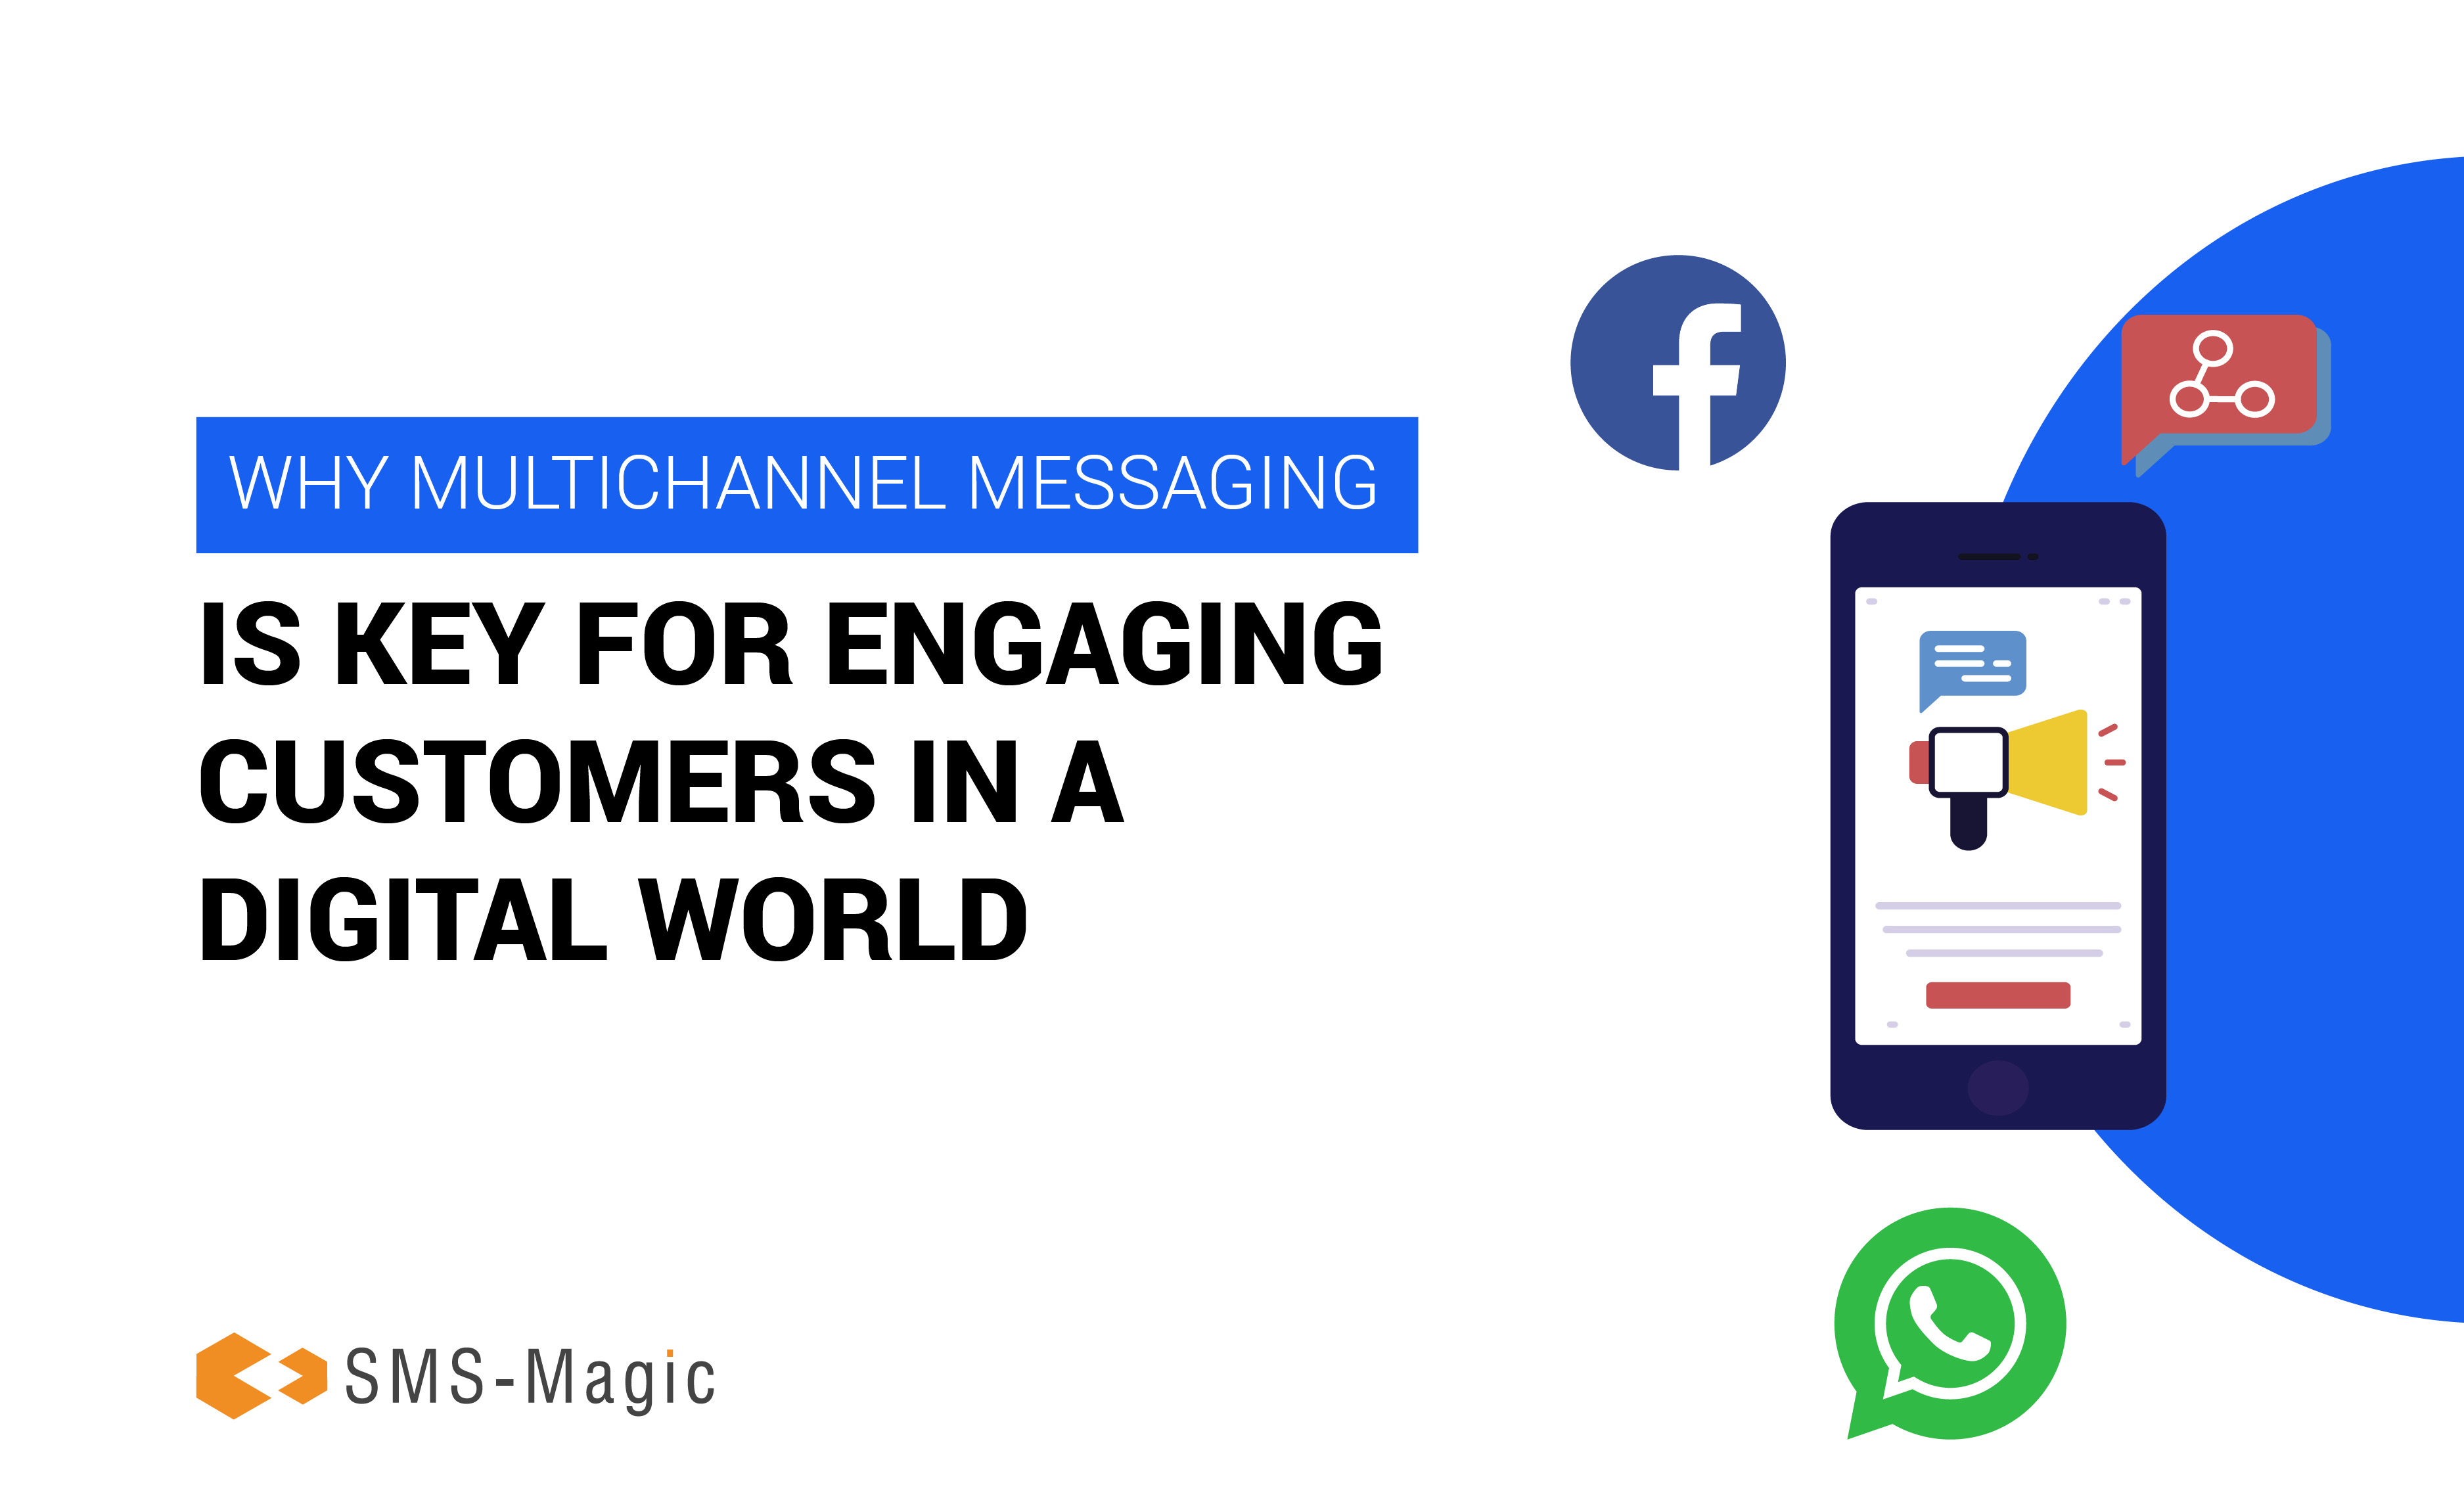 WHY MULTICHANNEL MESSAGING IS KEY FOR ENGAGING CUSTOMERS IN A DIGITAL WORLD